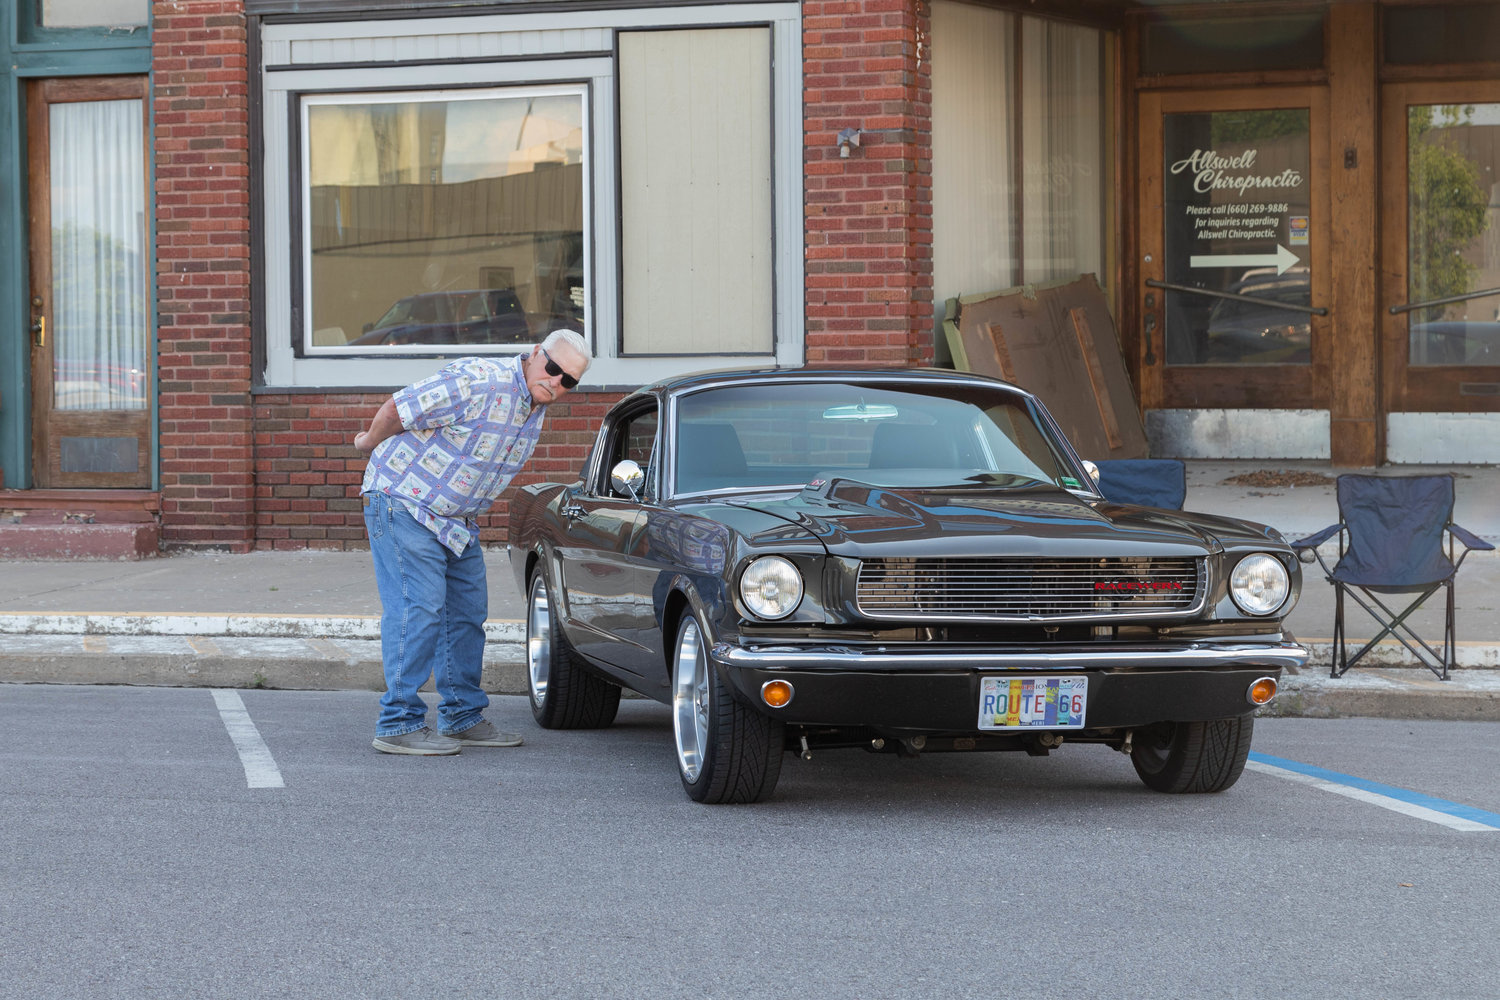 Tony Gamman checks out Bruce Barkelew’s 1966 Ford Mustang fastback on Clark Street in Moberly. Barkelew, of Columbia, brought his vintage vehicle to the Friday Night Cruise after hearing about the event at a car show last weekend.